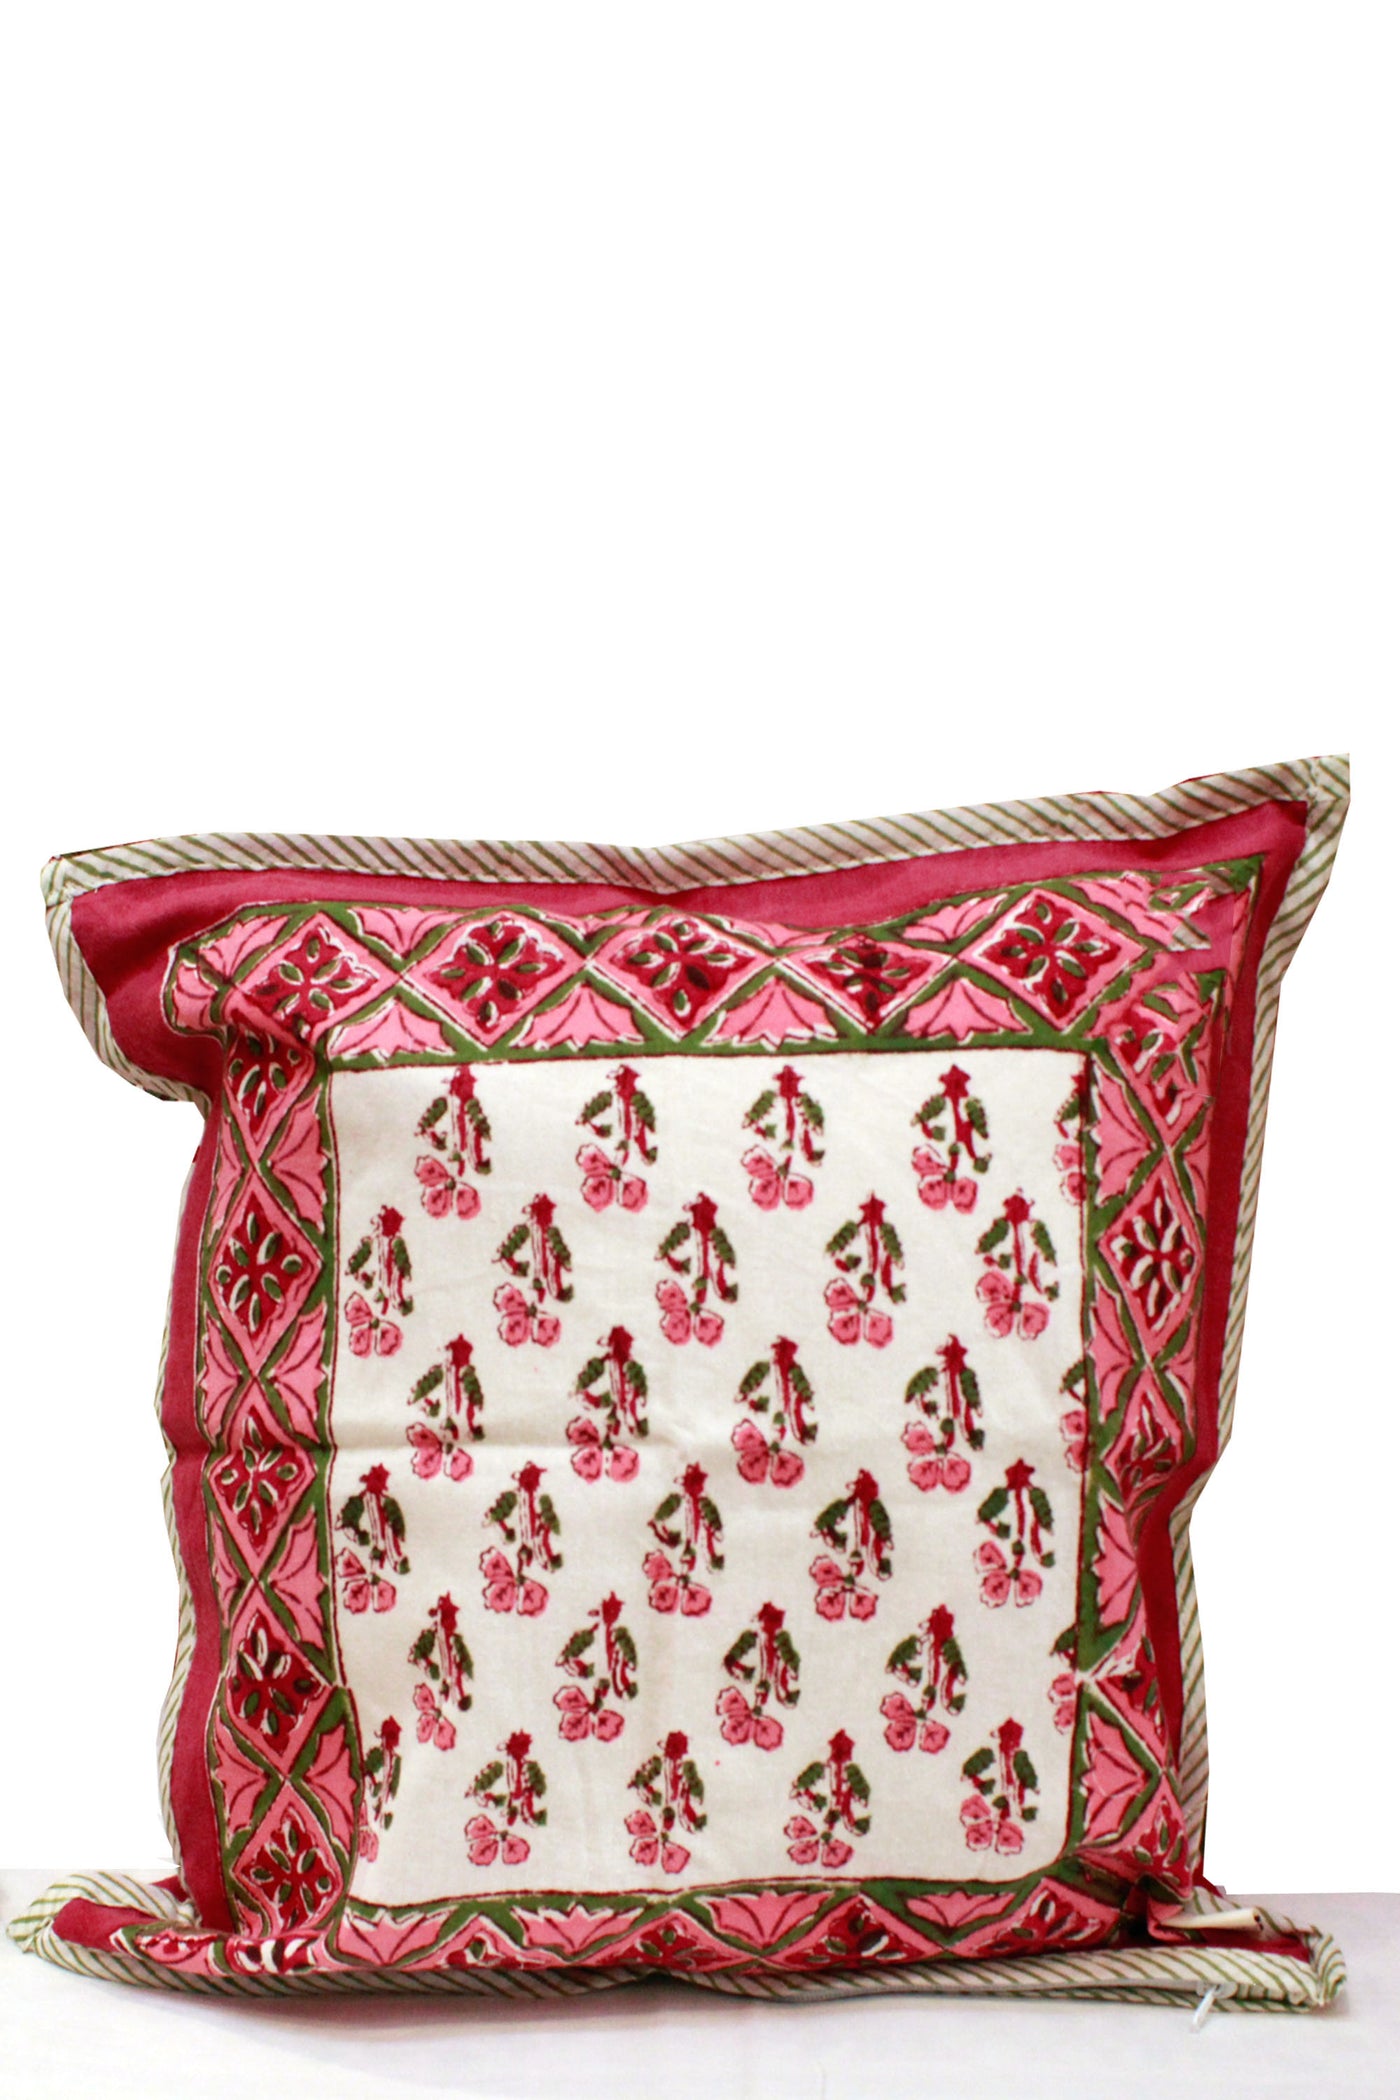 Cotton Mughal Buta Hand Block Printed Cushion Cover in Red